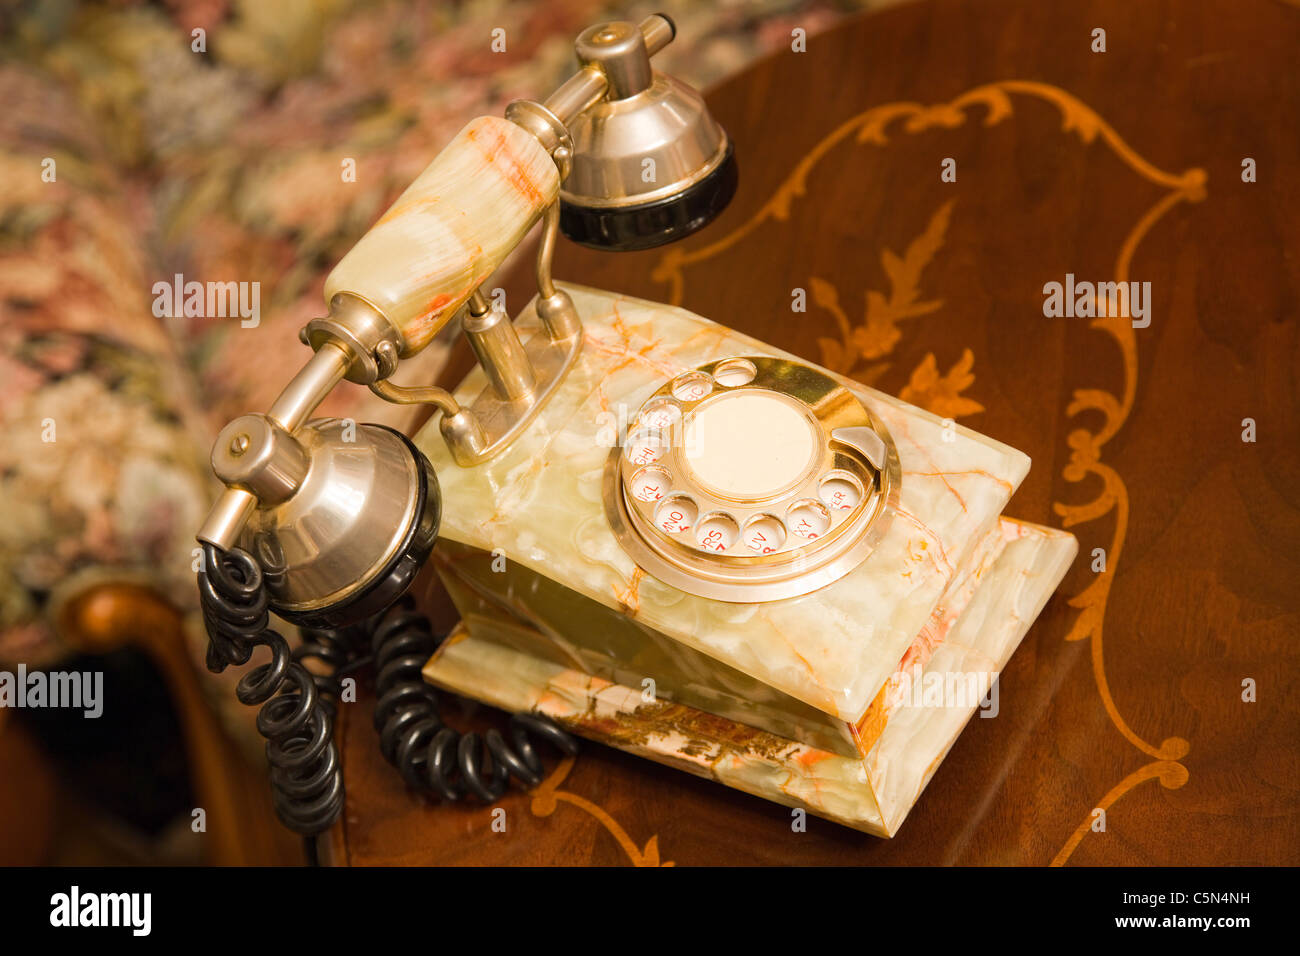 Old fashioned telephone in a house Stock Photo